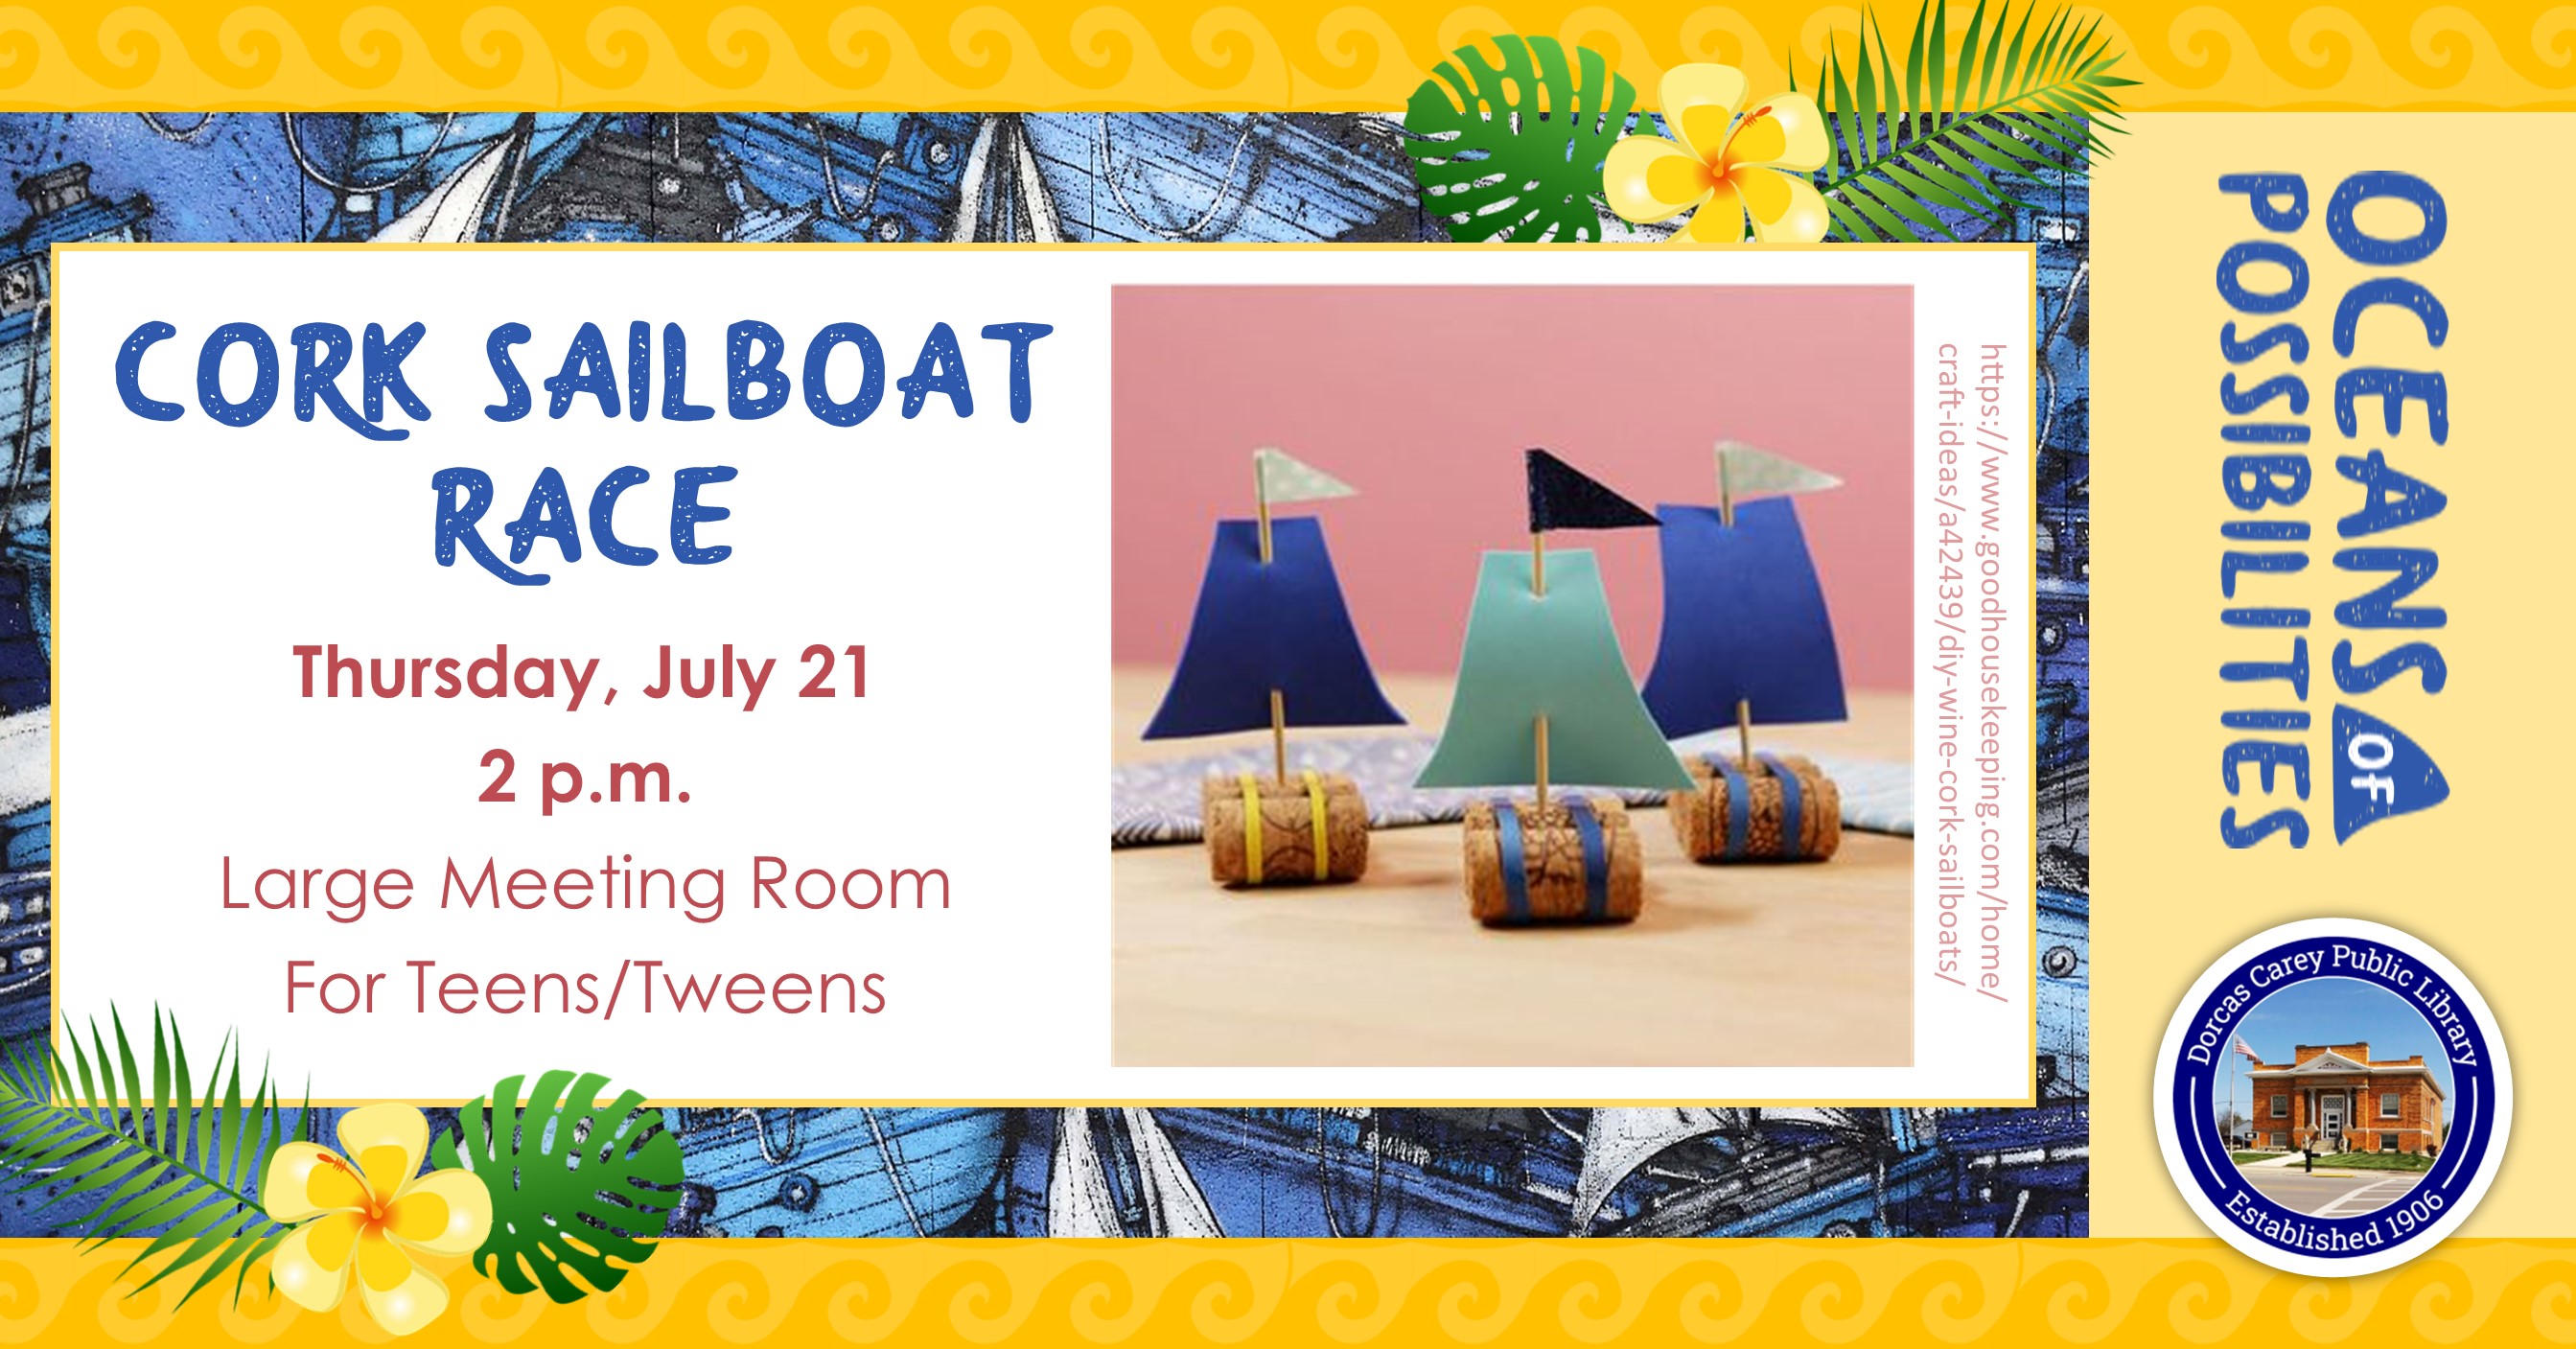 Join us for crafts in the Tween/Teen Department.  We will be making Cork Sail Boat.